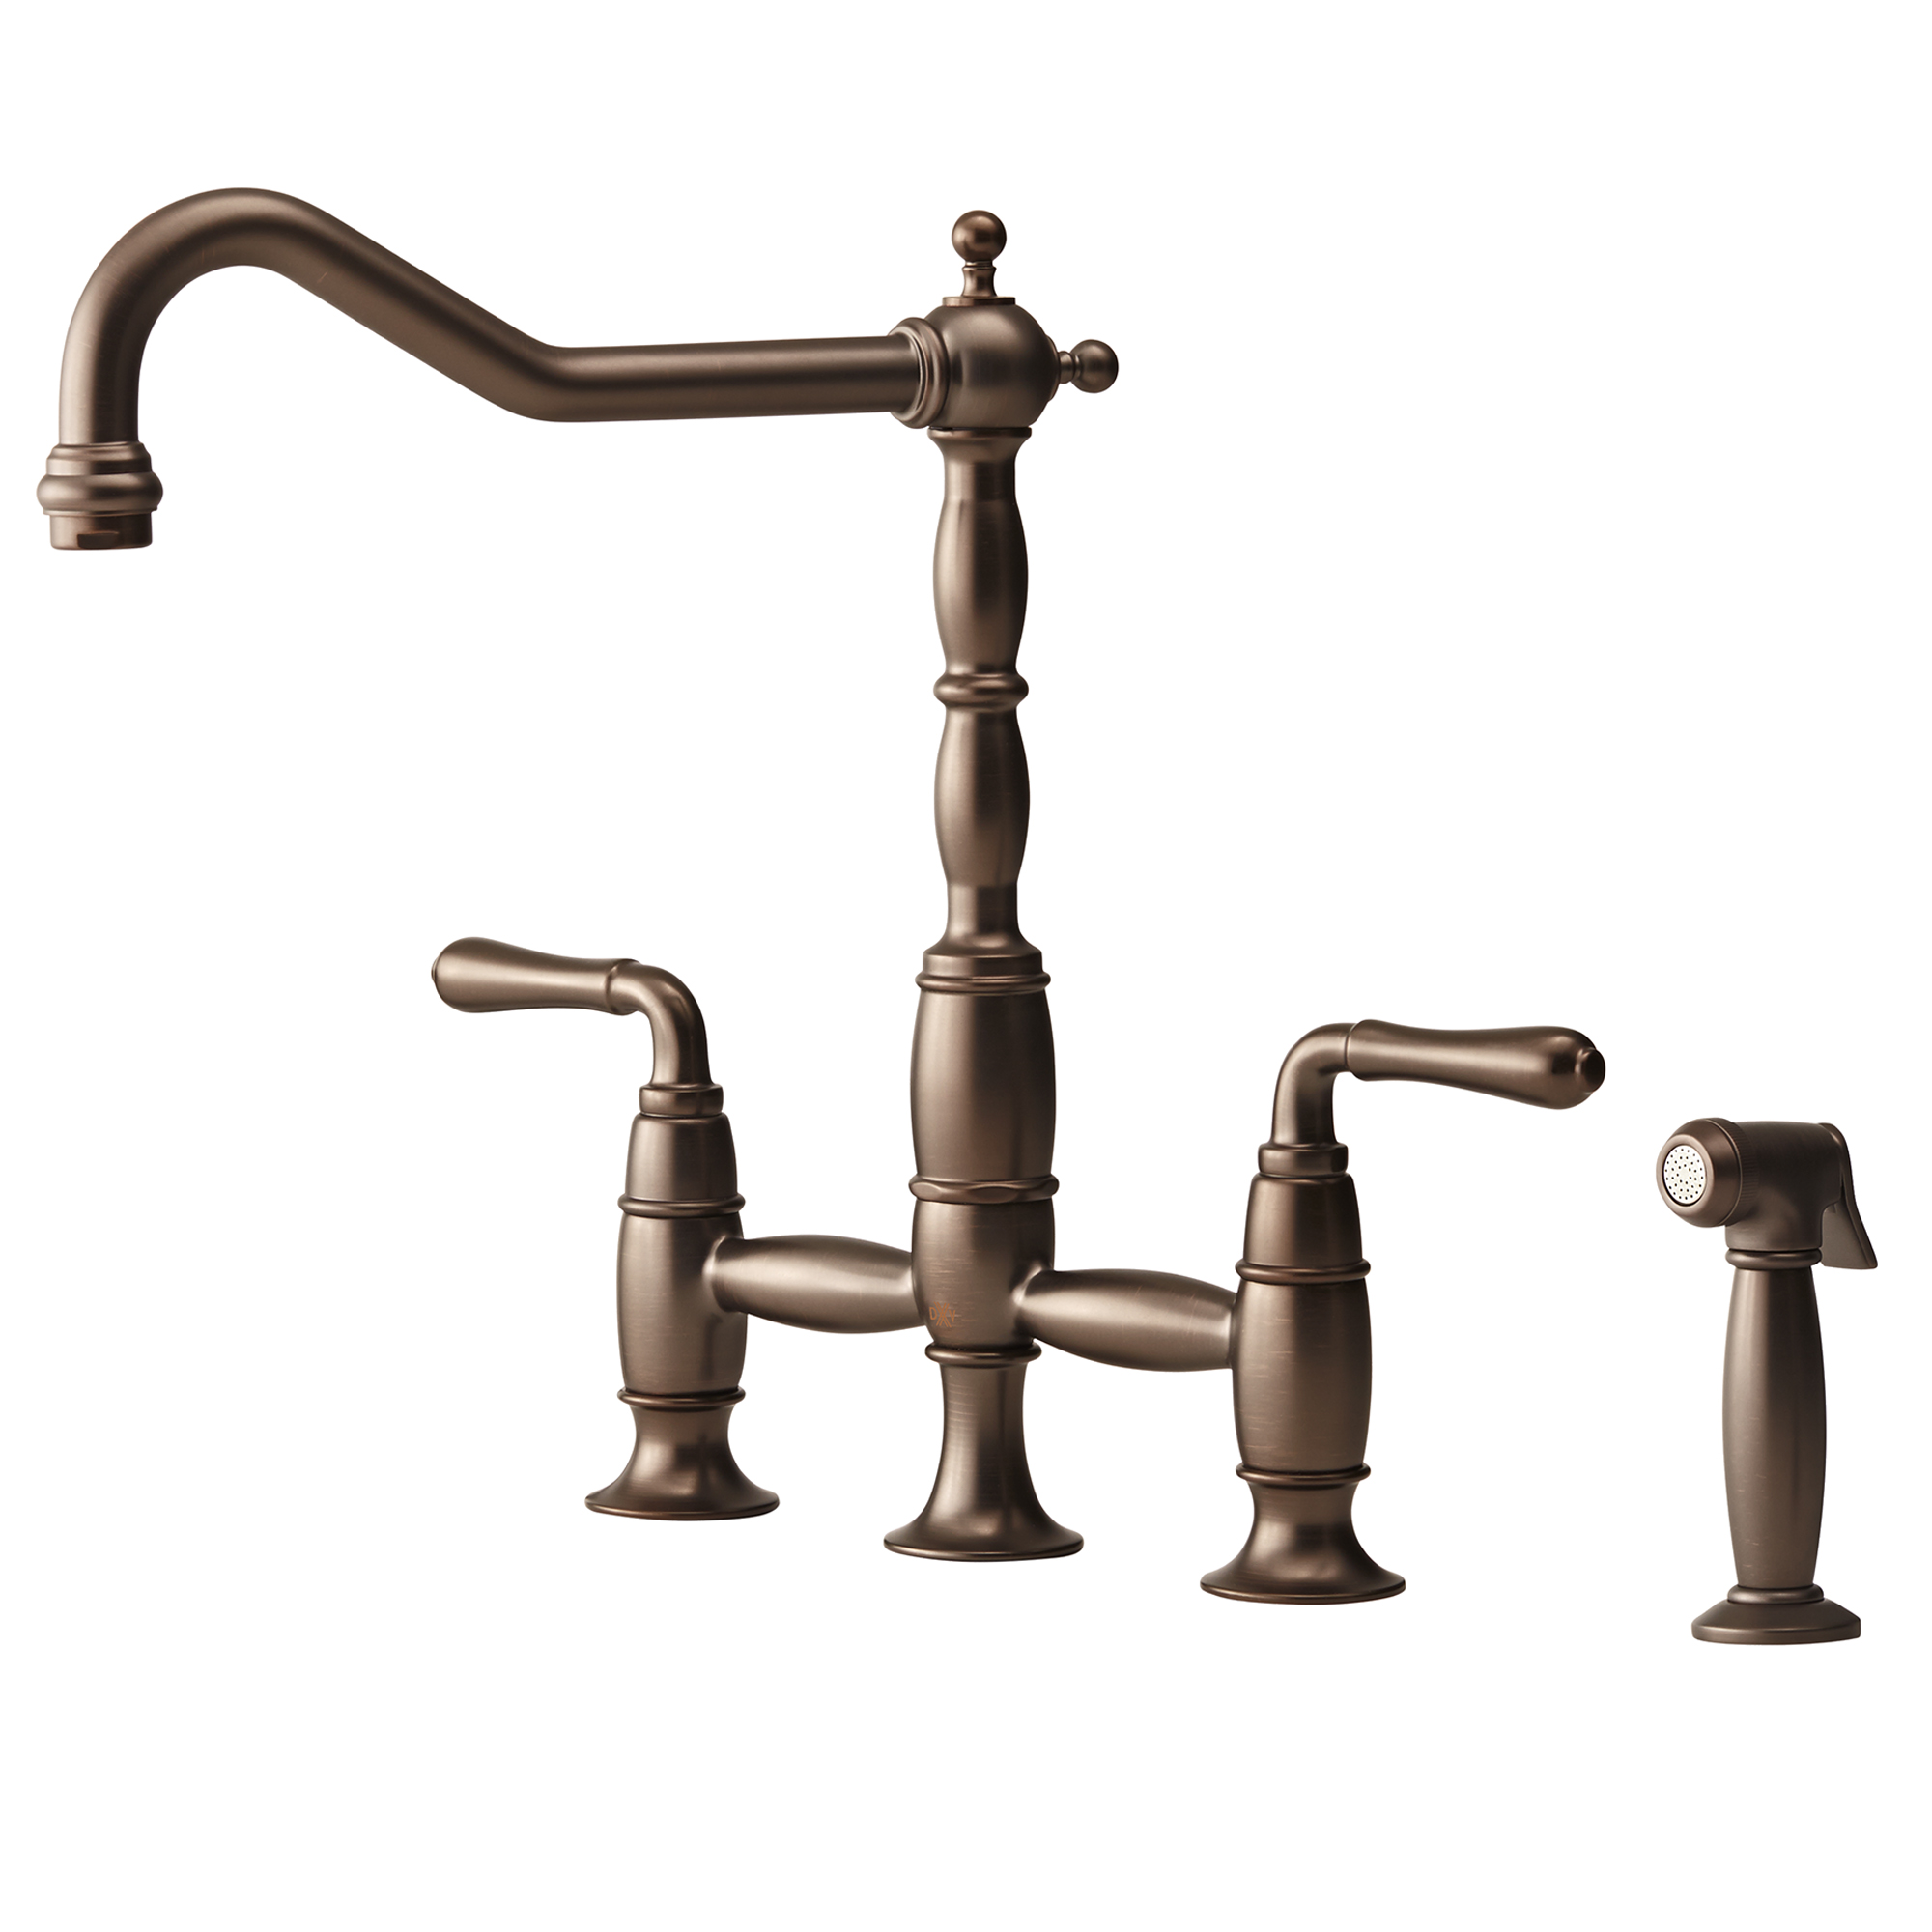 Victorian 2-Handle Widespread Bridge Kitchen Faucet with Side Spray and Lever Handles